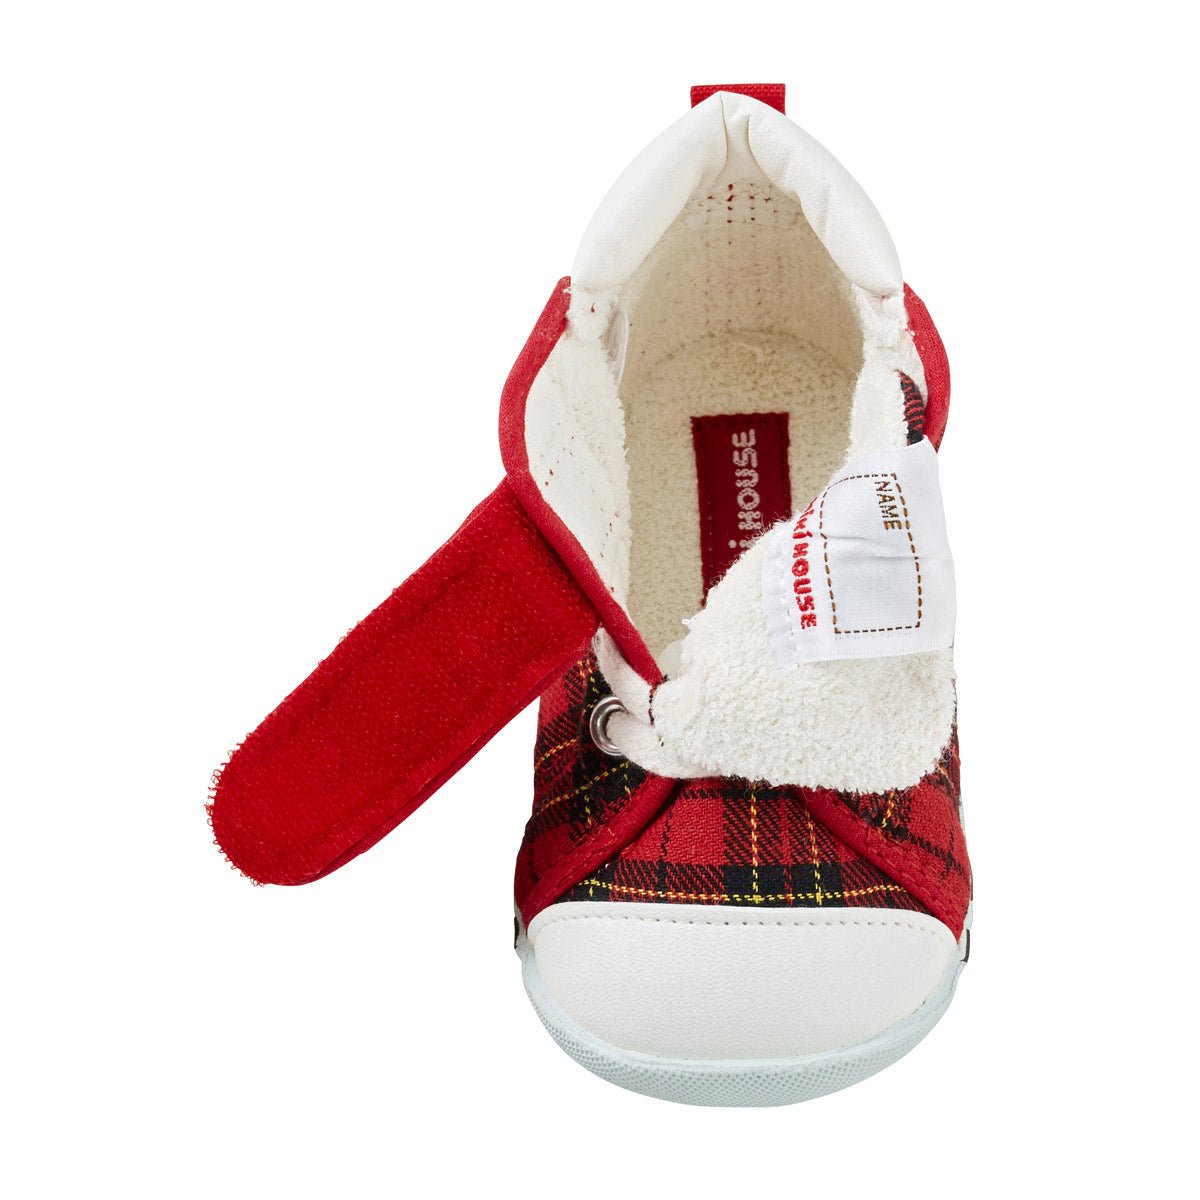 High Top First Walker shoes - Stylish Plaid - MIKI HOUSE USA